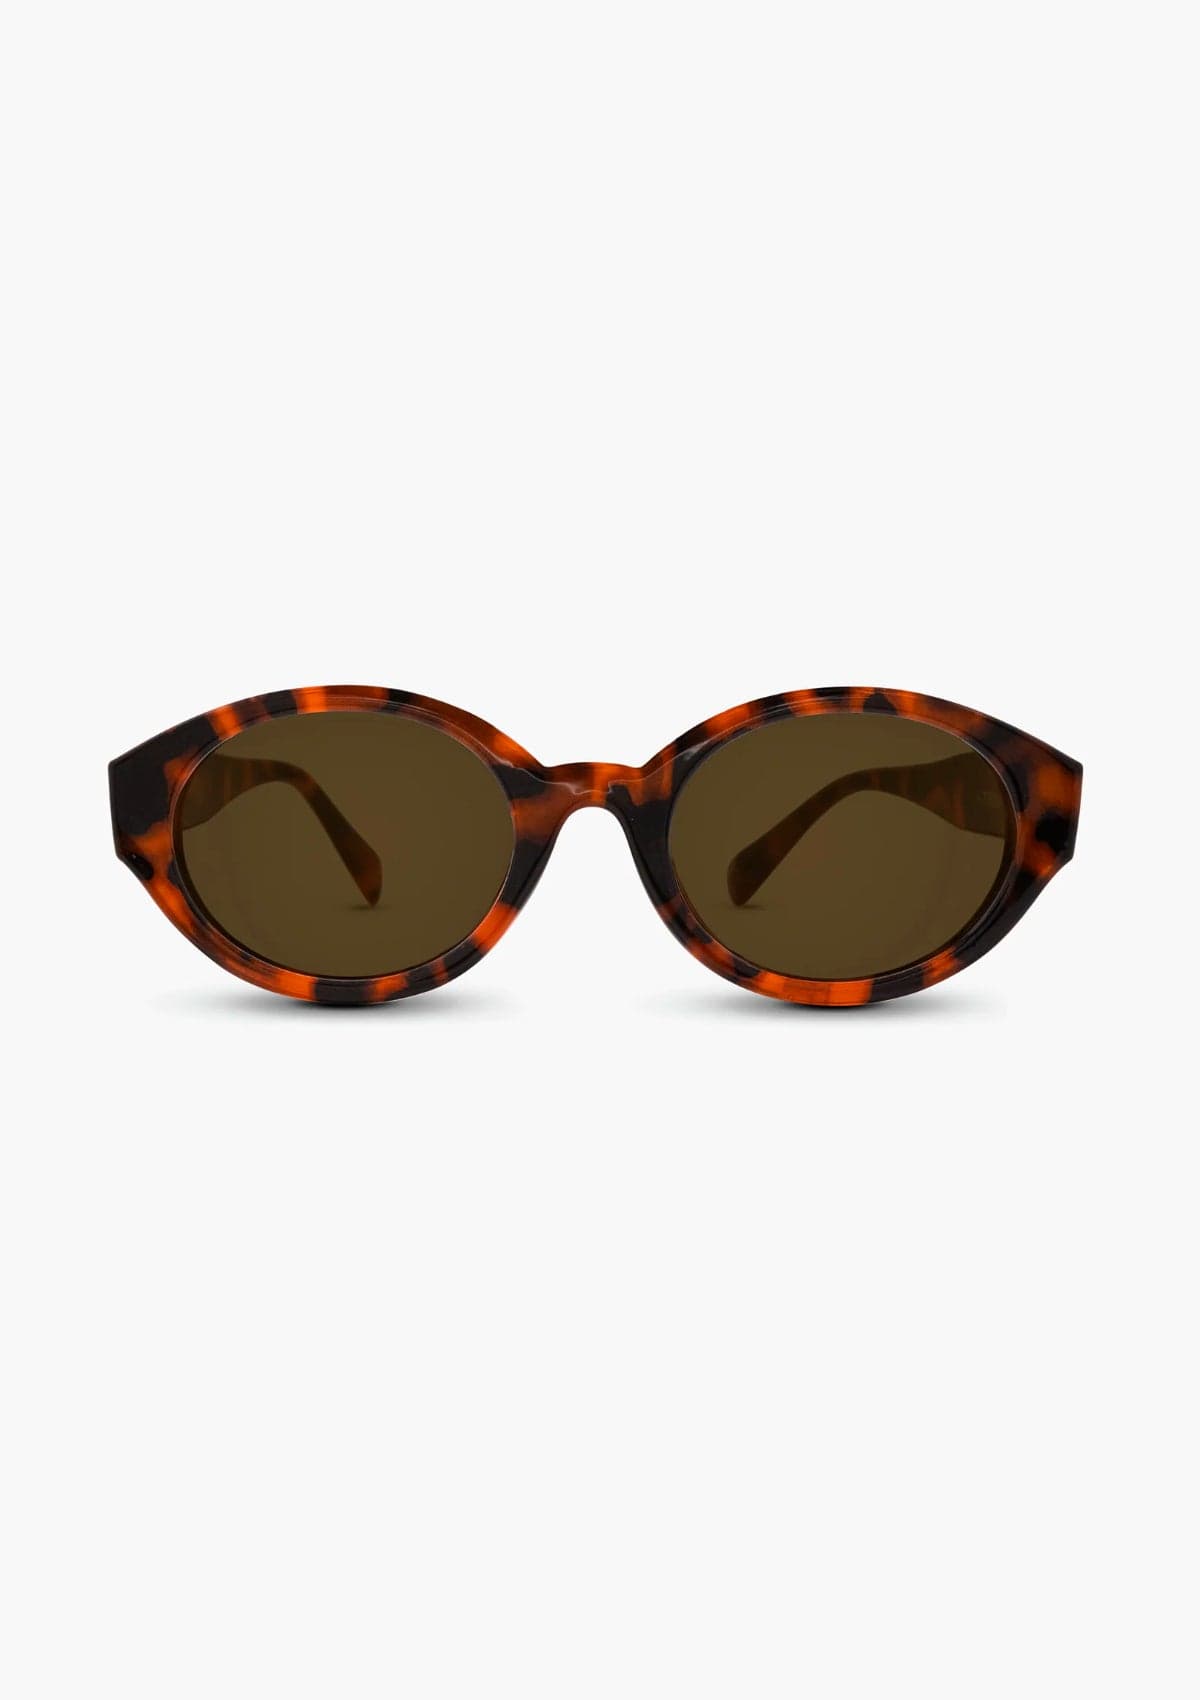 Nectar Atypical Amber Lens - Brown Tortoise Frame